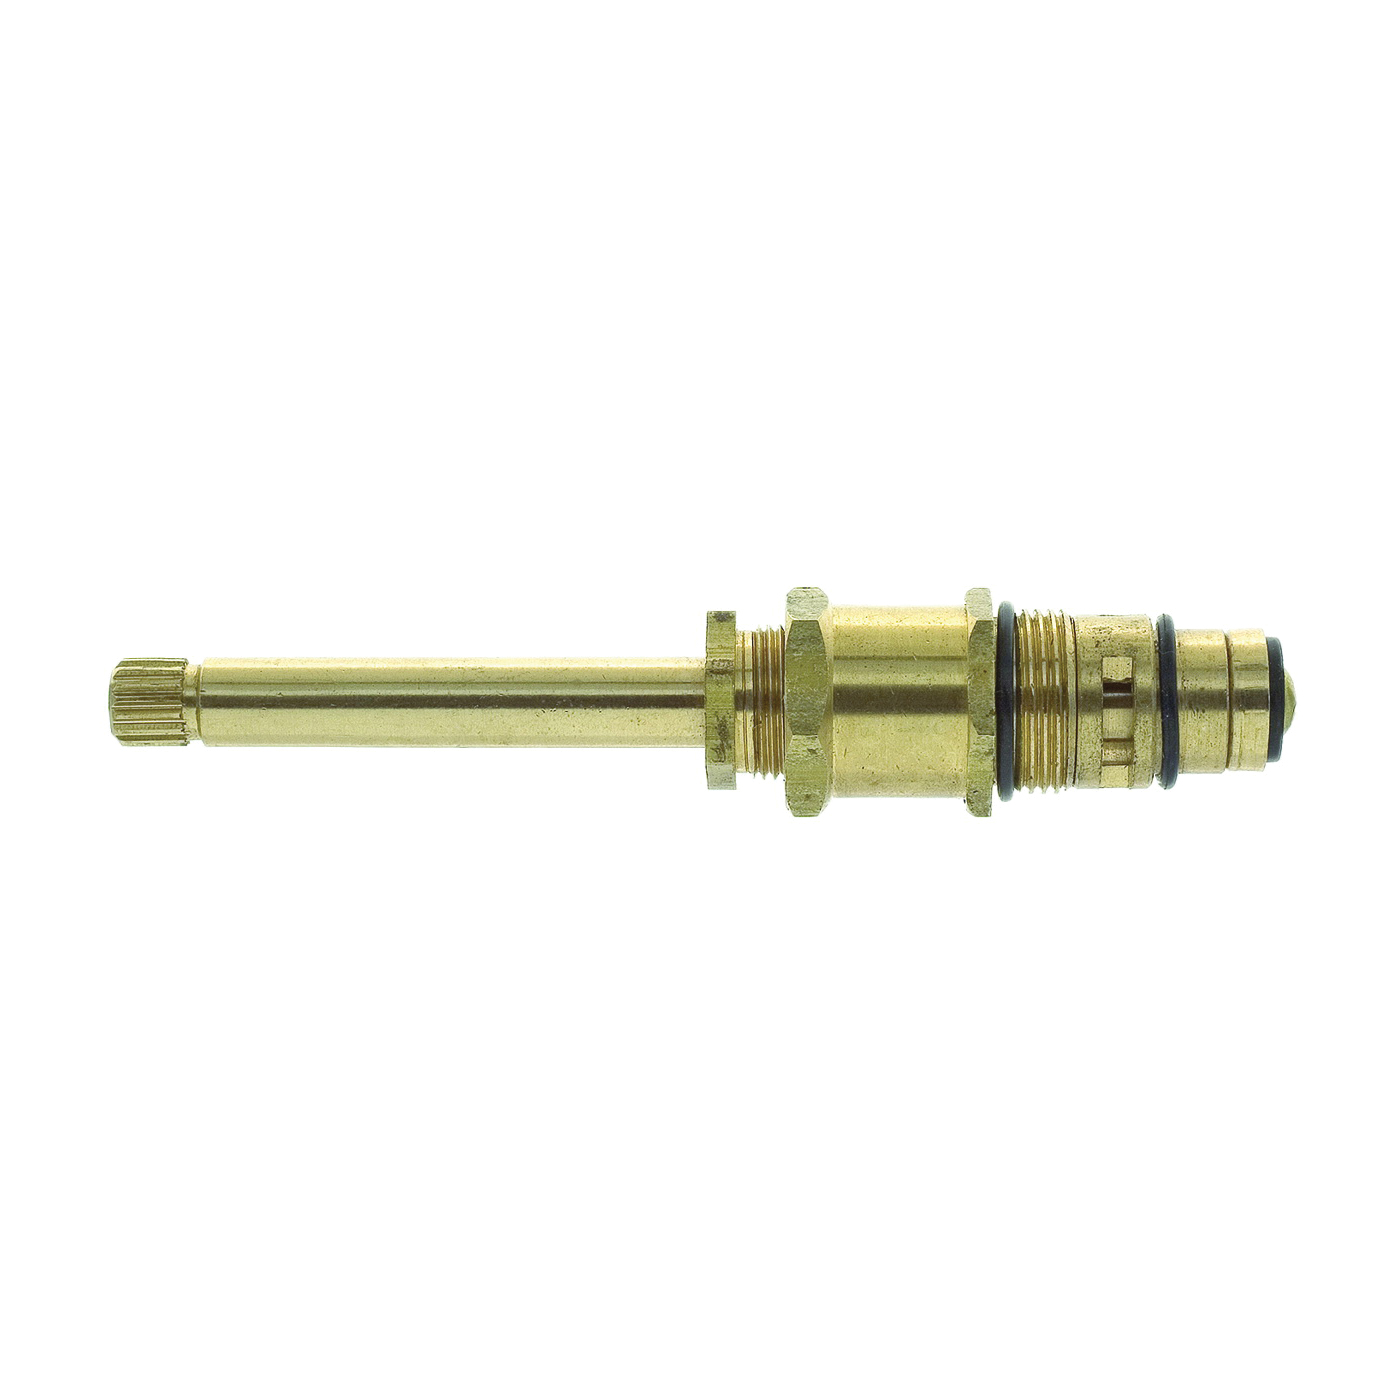 15886B Diverter Stem, Brass, 4-11/16 in L, For: Sayco Two Handle Models 308 and T-308 Bath Faucets